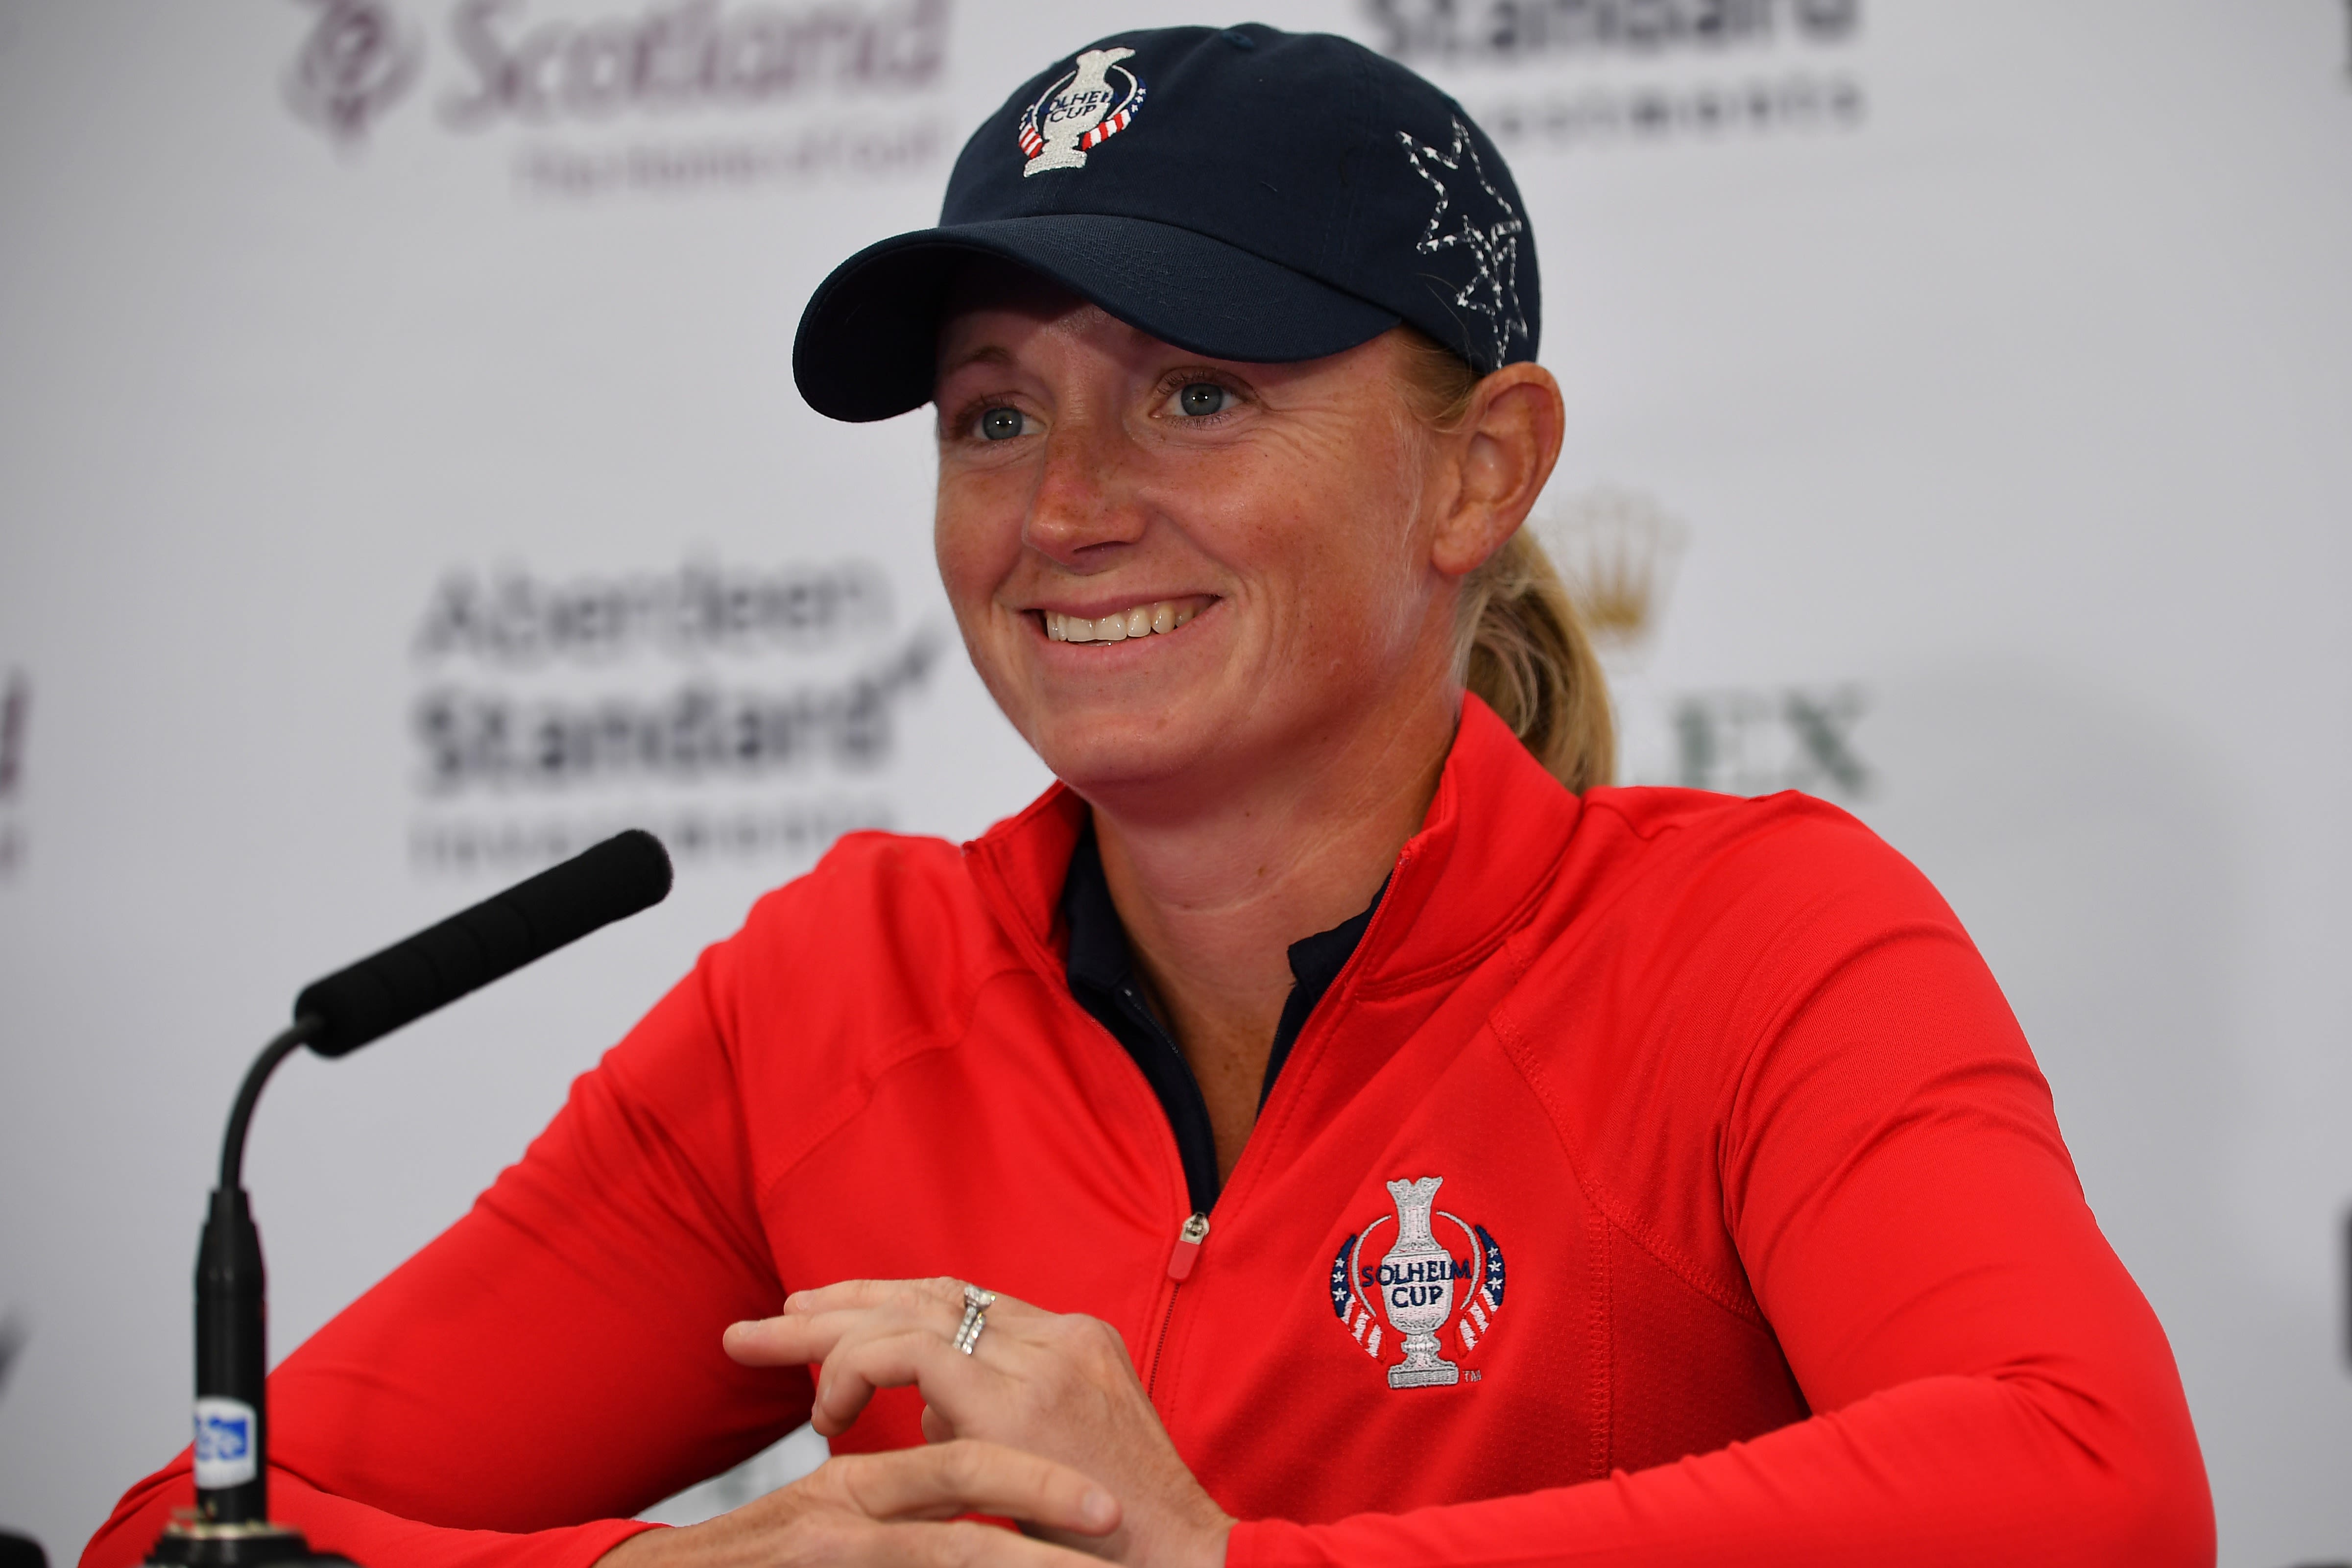 Stacy Lewis of Team USA prior to the start of The Solheim Cup at Gleneagles on September 10, 2019 in Auchterarder, Scotland. (Photo by Stuart Franklin/Getty Images